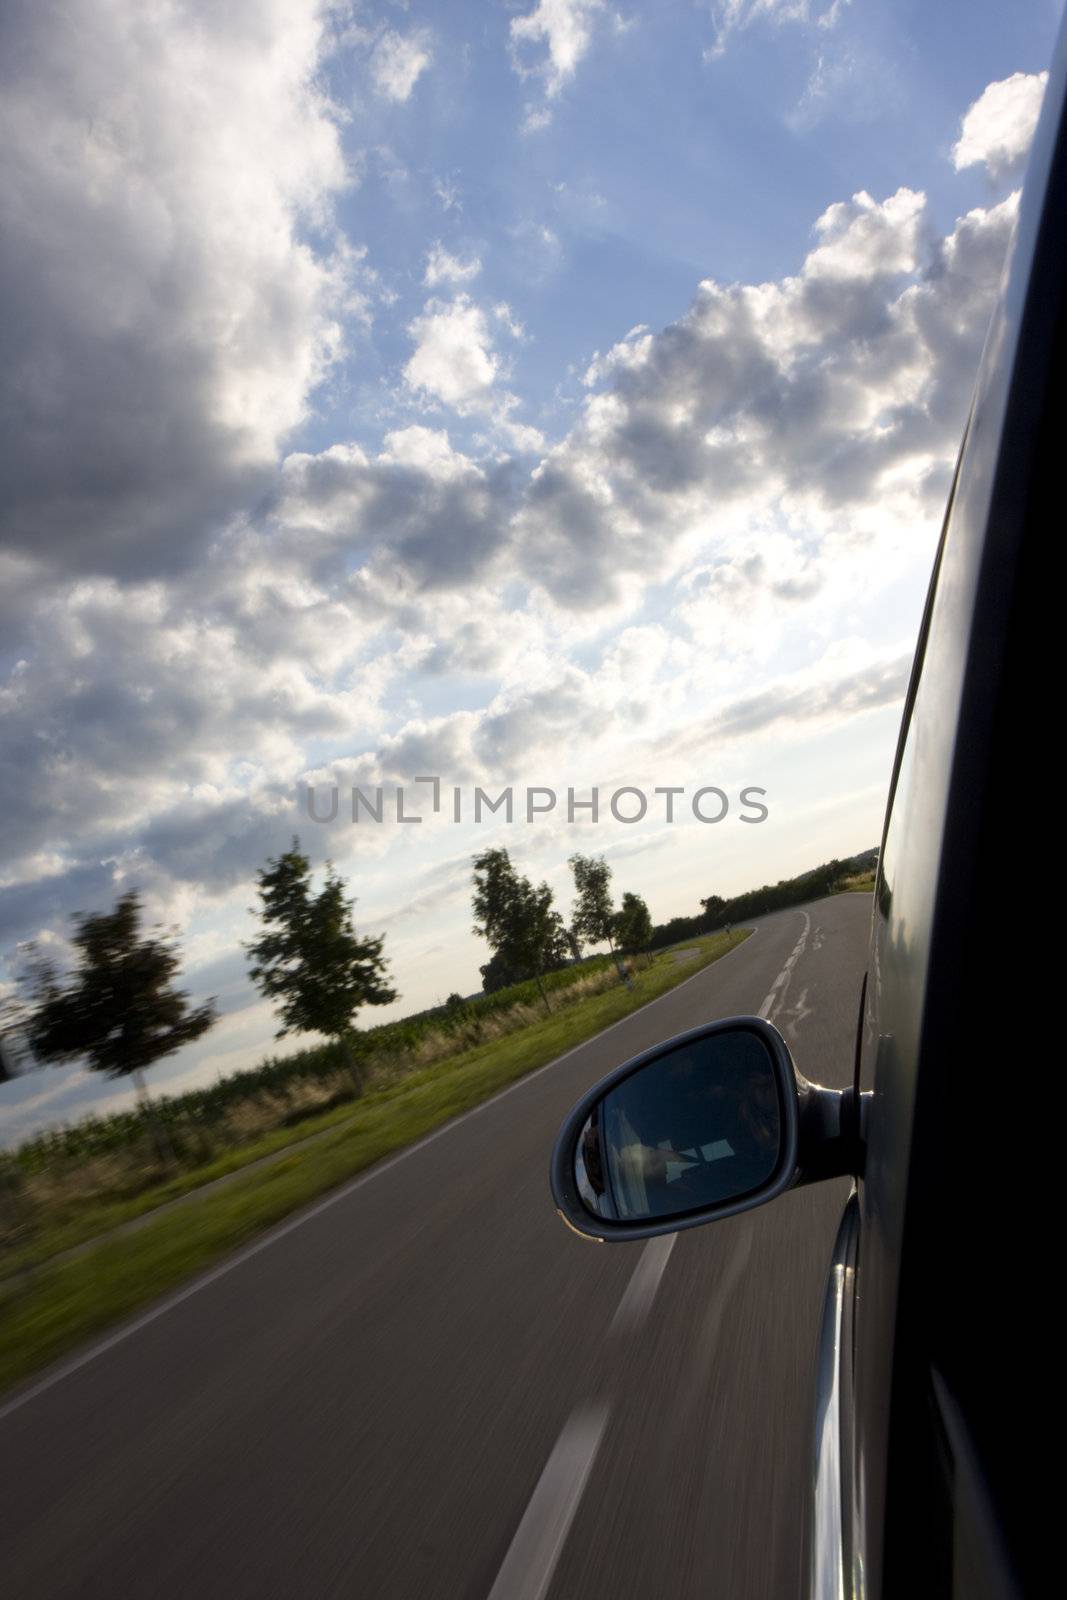 detail of a car driving on a country road by bernjuer